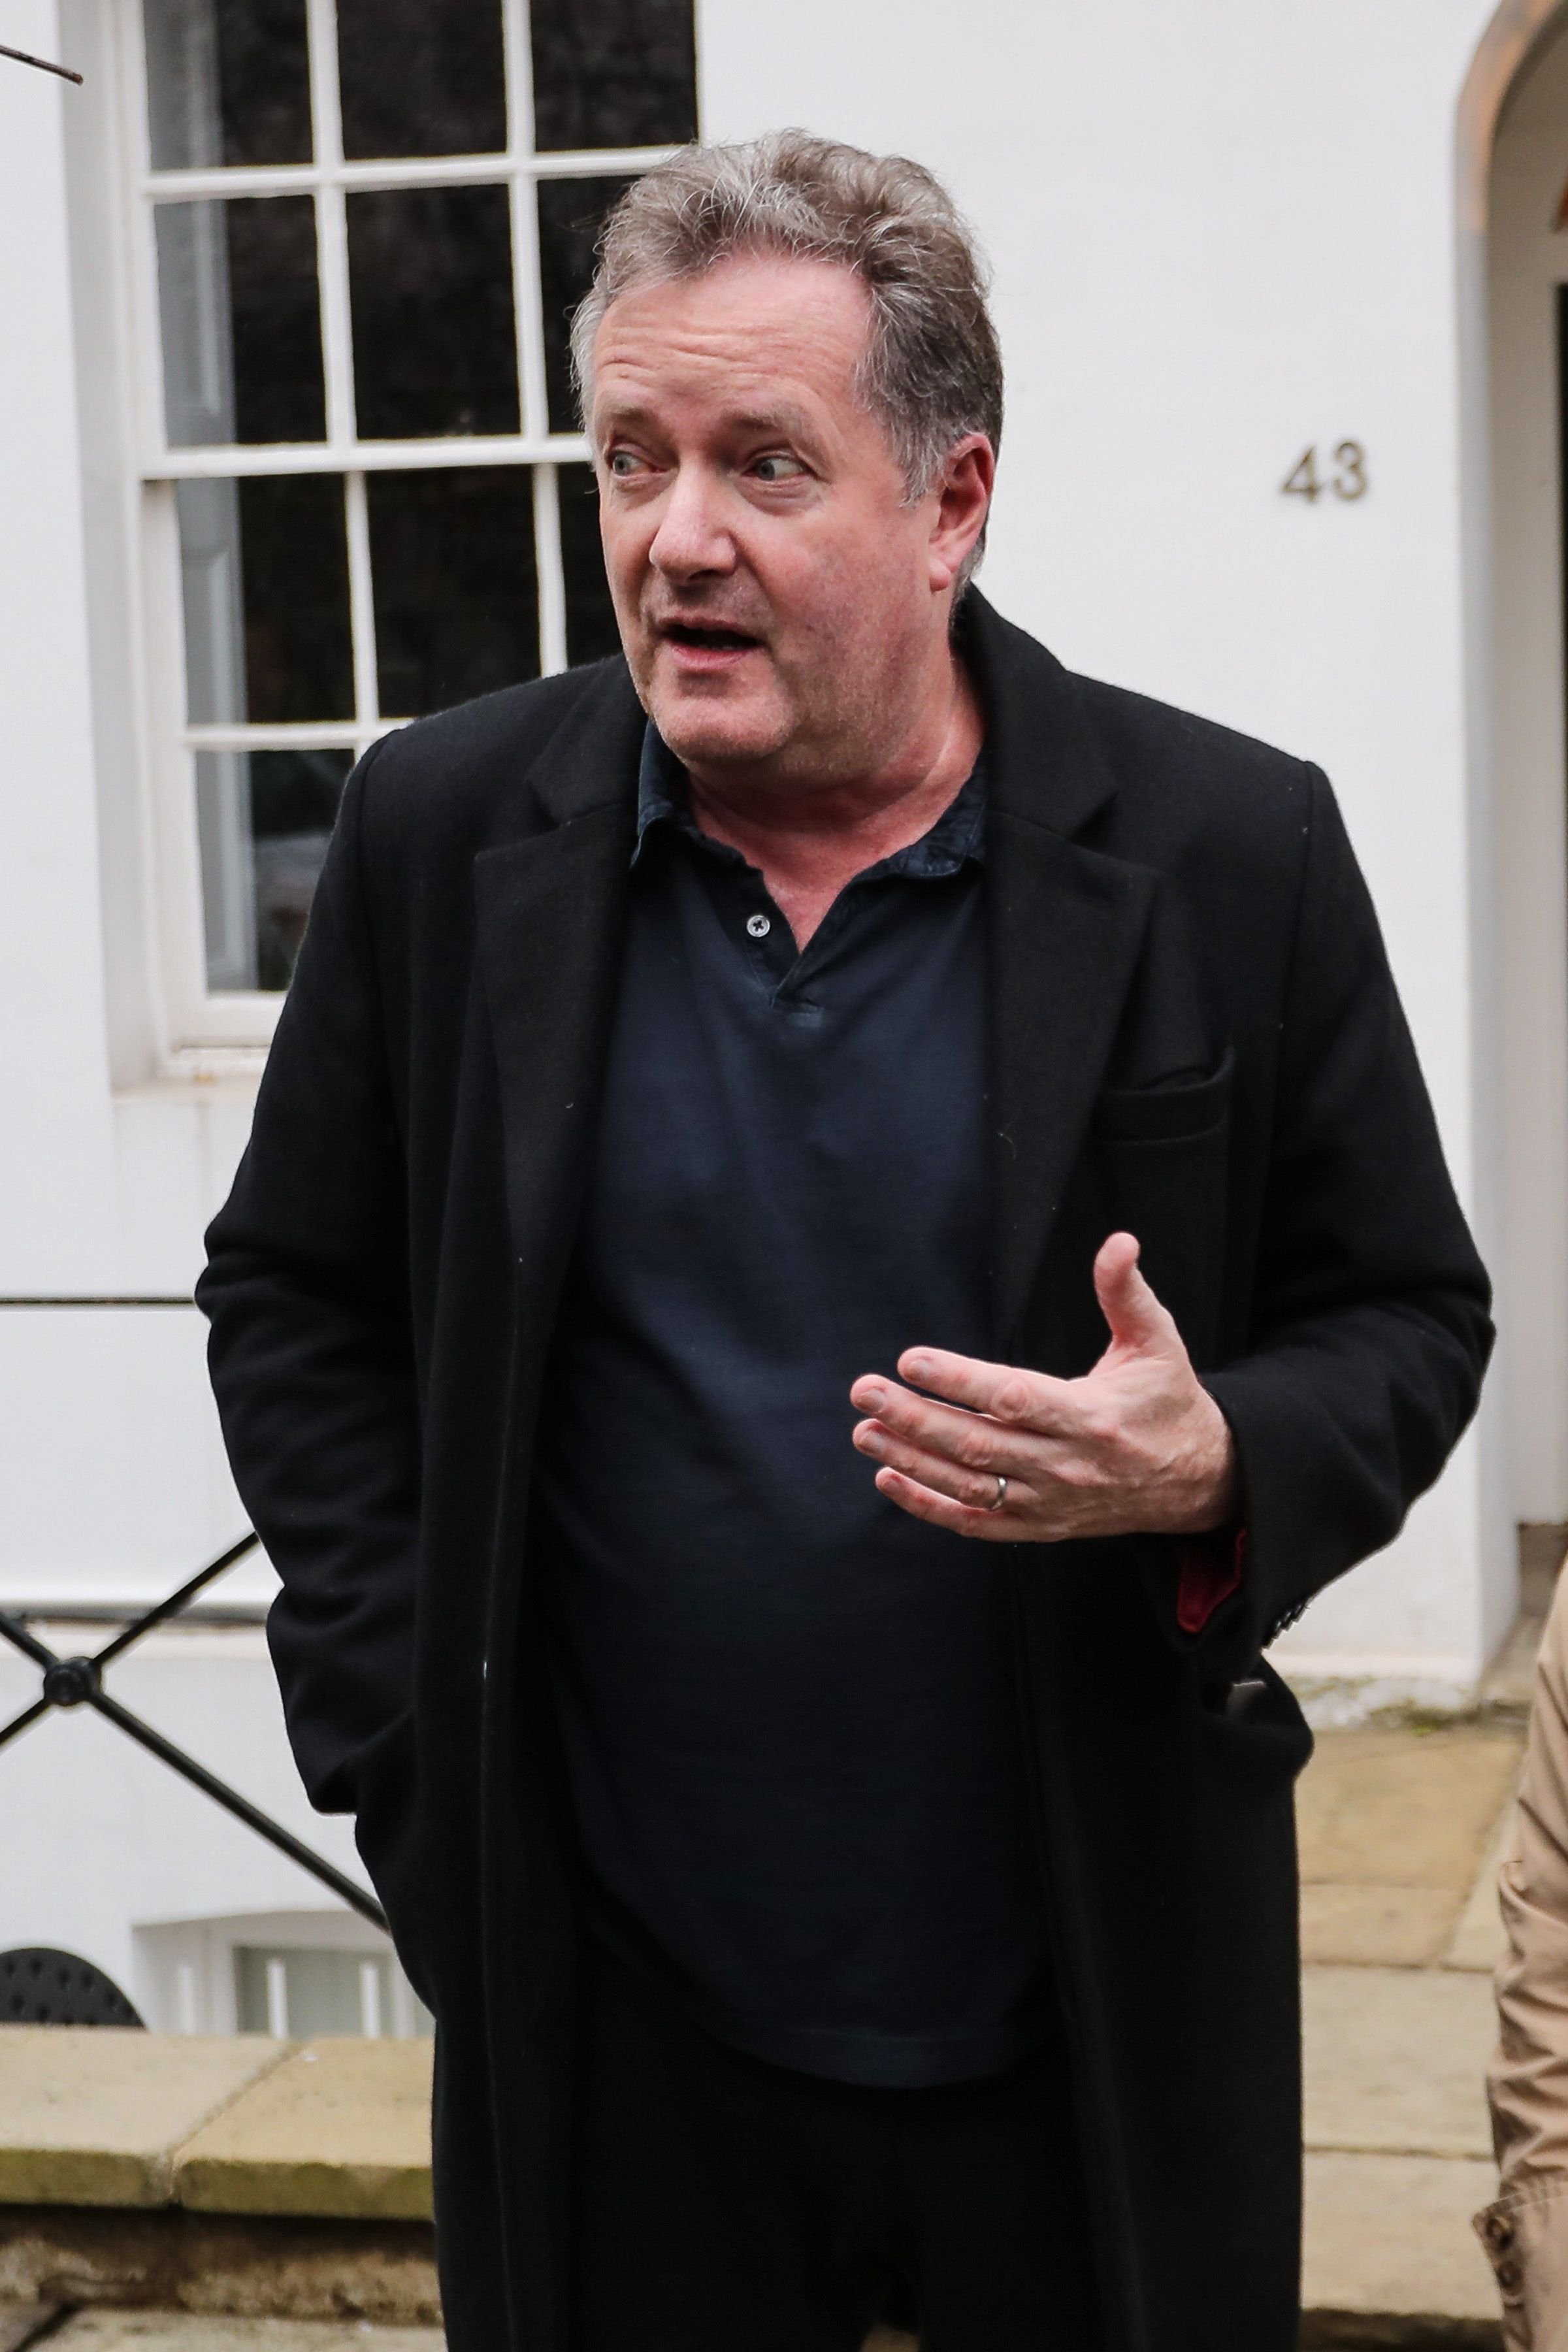 Piers Morgan seen leaving his West London home to take his daughter, Elise, to school on March 10, 2021, in London, England | Photo: JORAS/GC Images/Getty Images